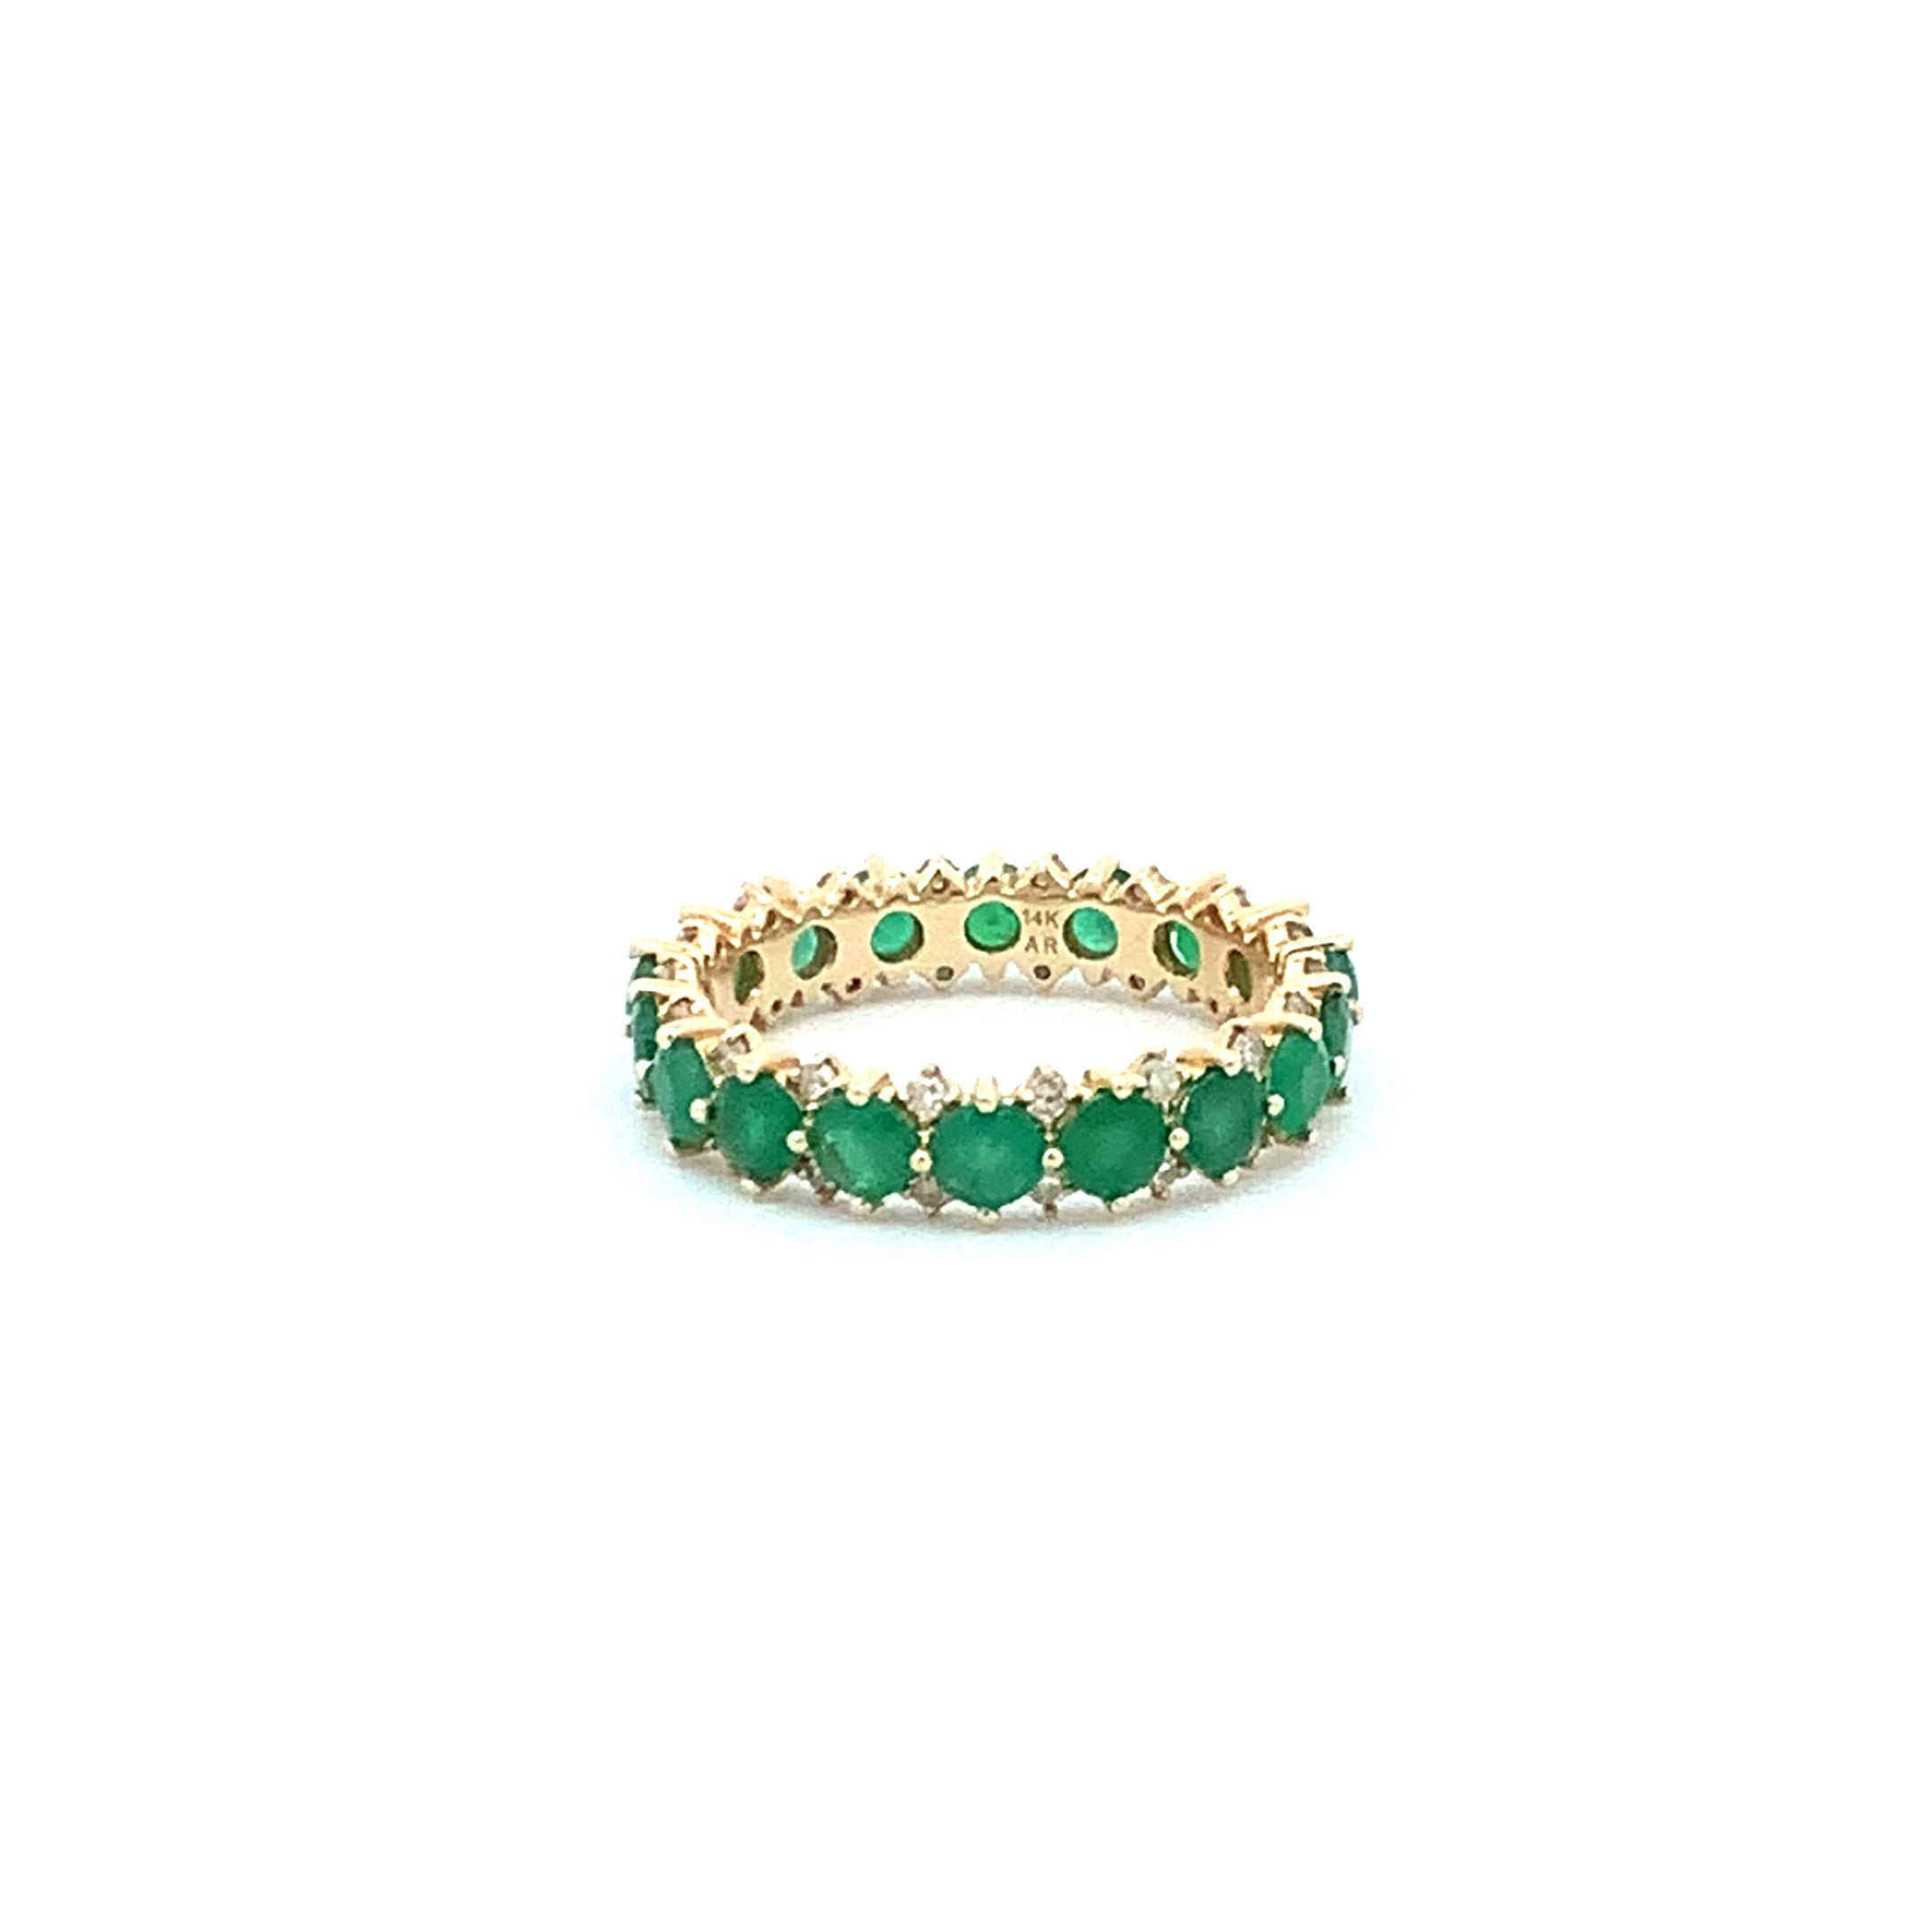 Adina Reyter One of a Kind Emerald + Diamond Rounds Ring